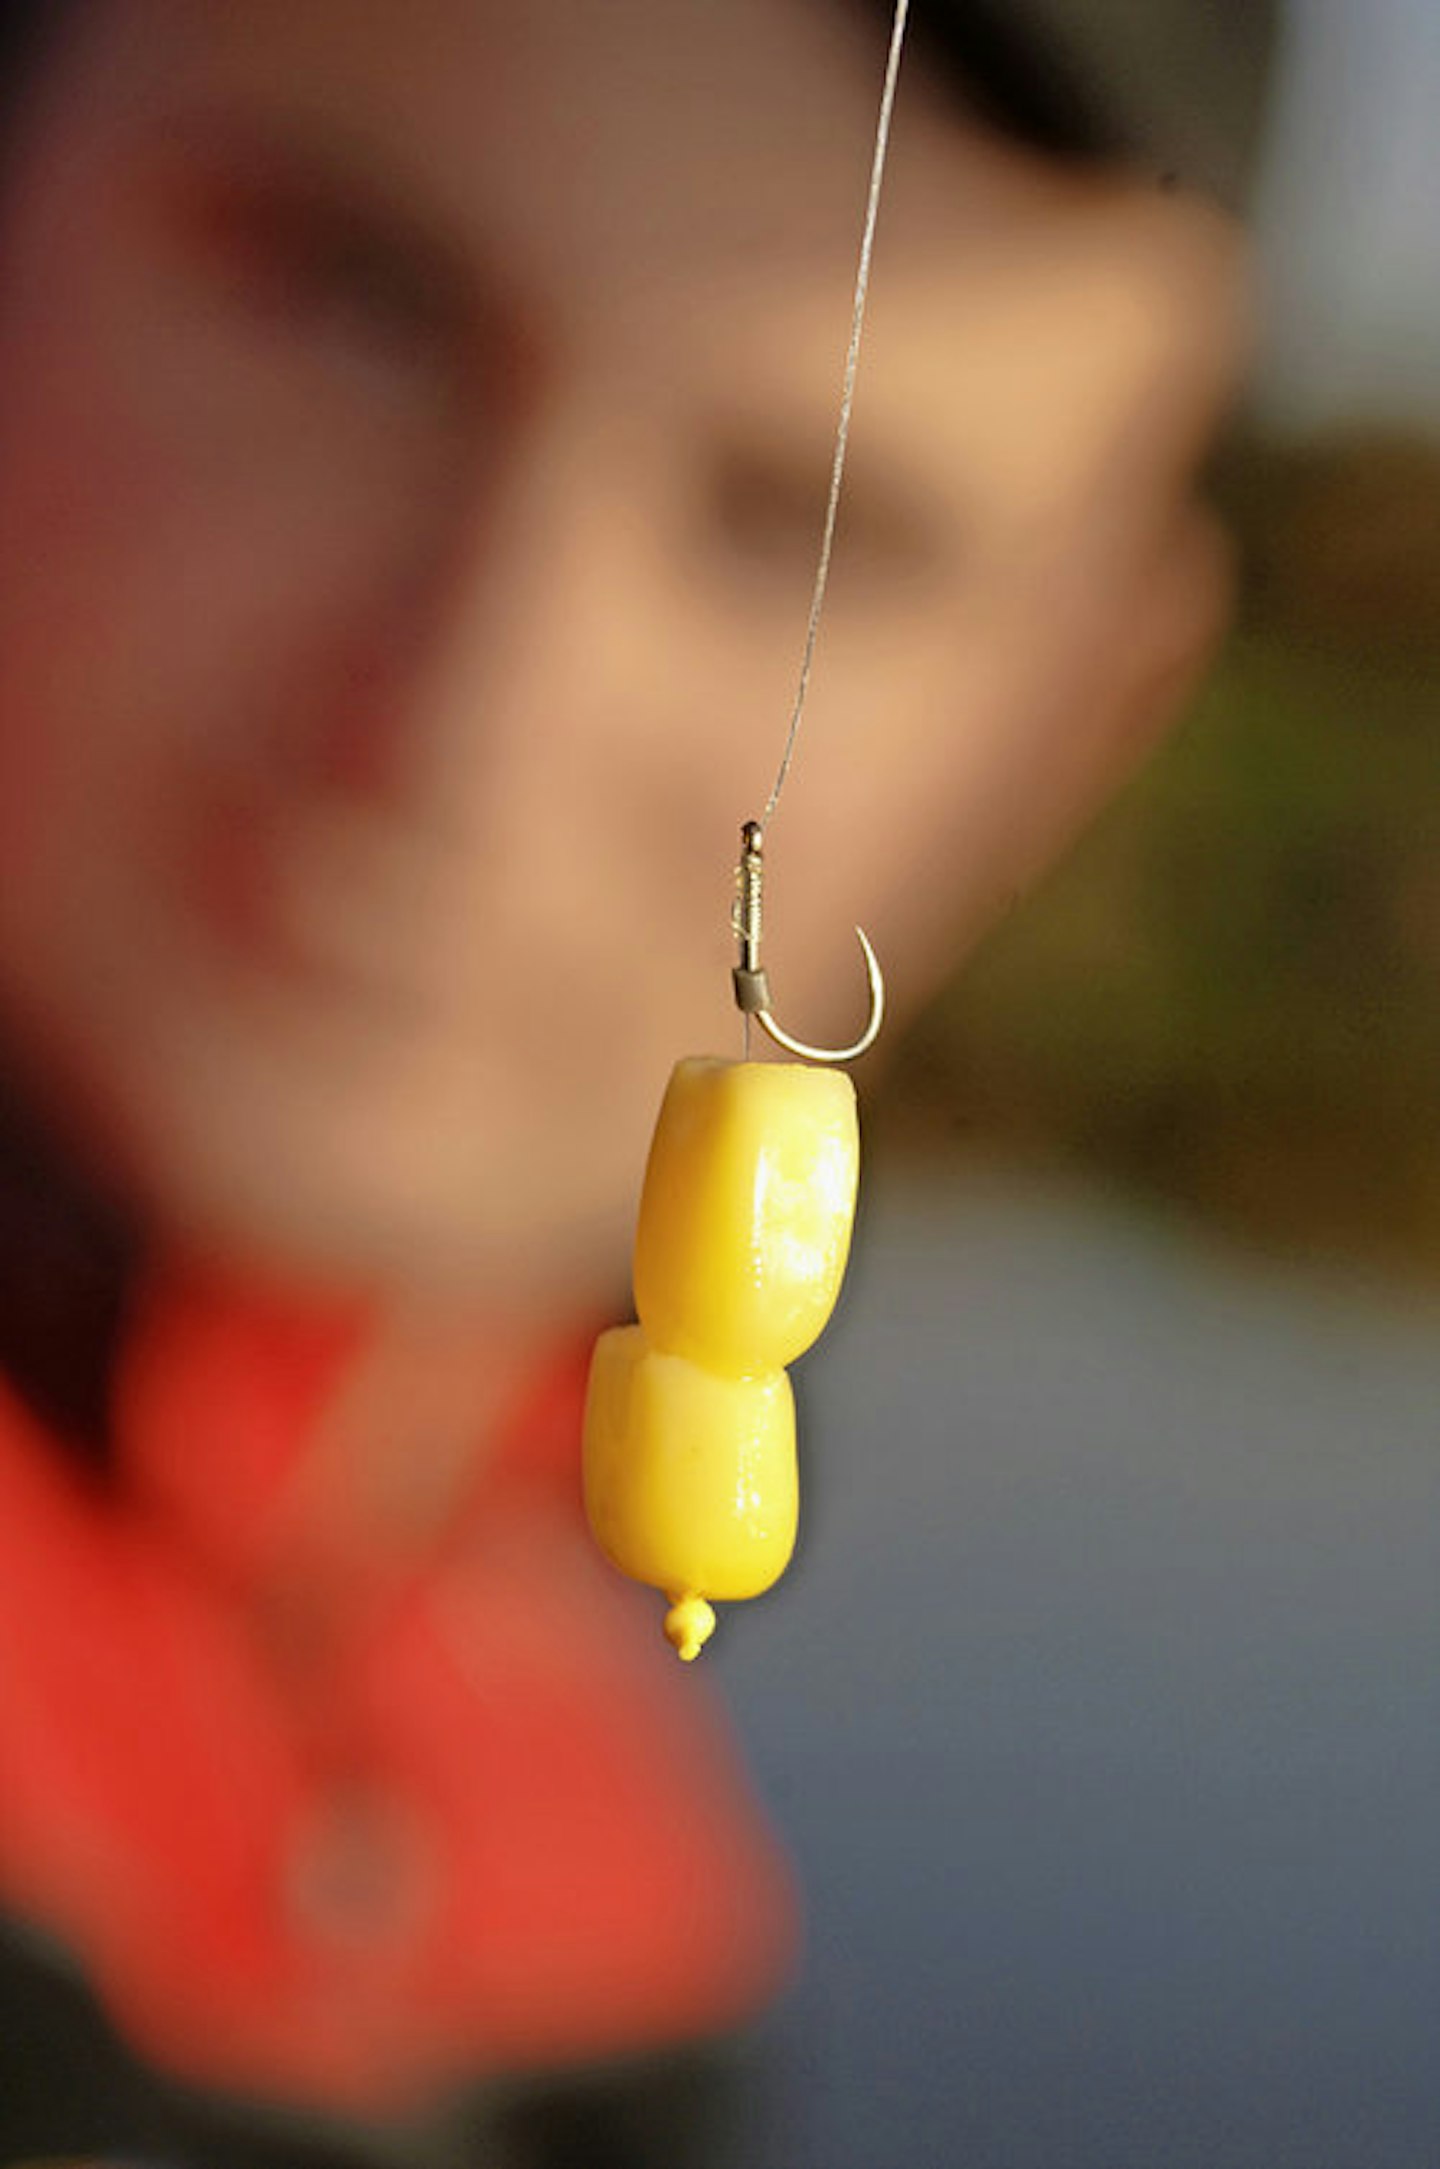 KNOW YOUR STUFF | HOW TO PLAY CARP ON THE POLE